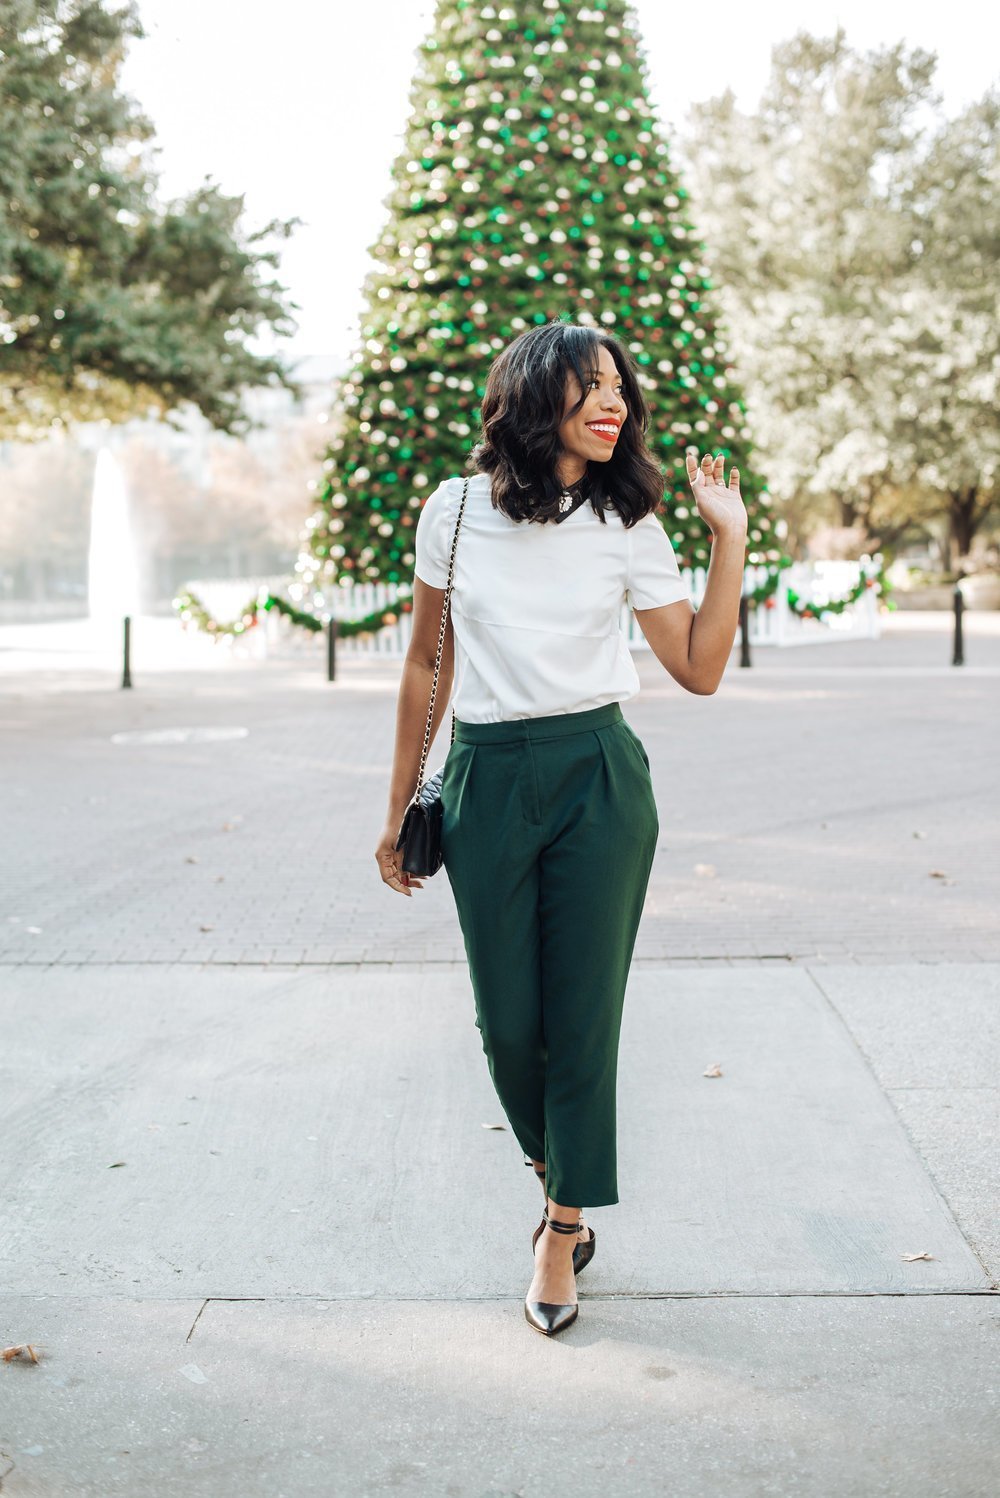 Women's White Crew-neck T-shirt, Dark Green Tapered Pants, Black Leather  Pumps, Black Quilted Leather Crossbody Bag